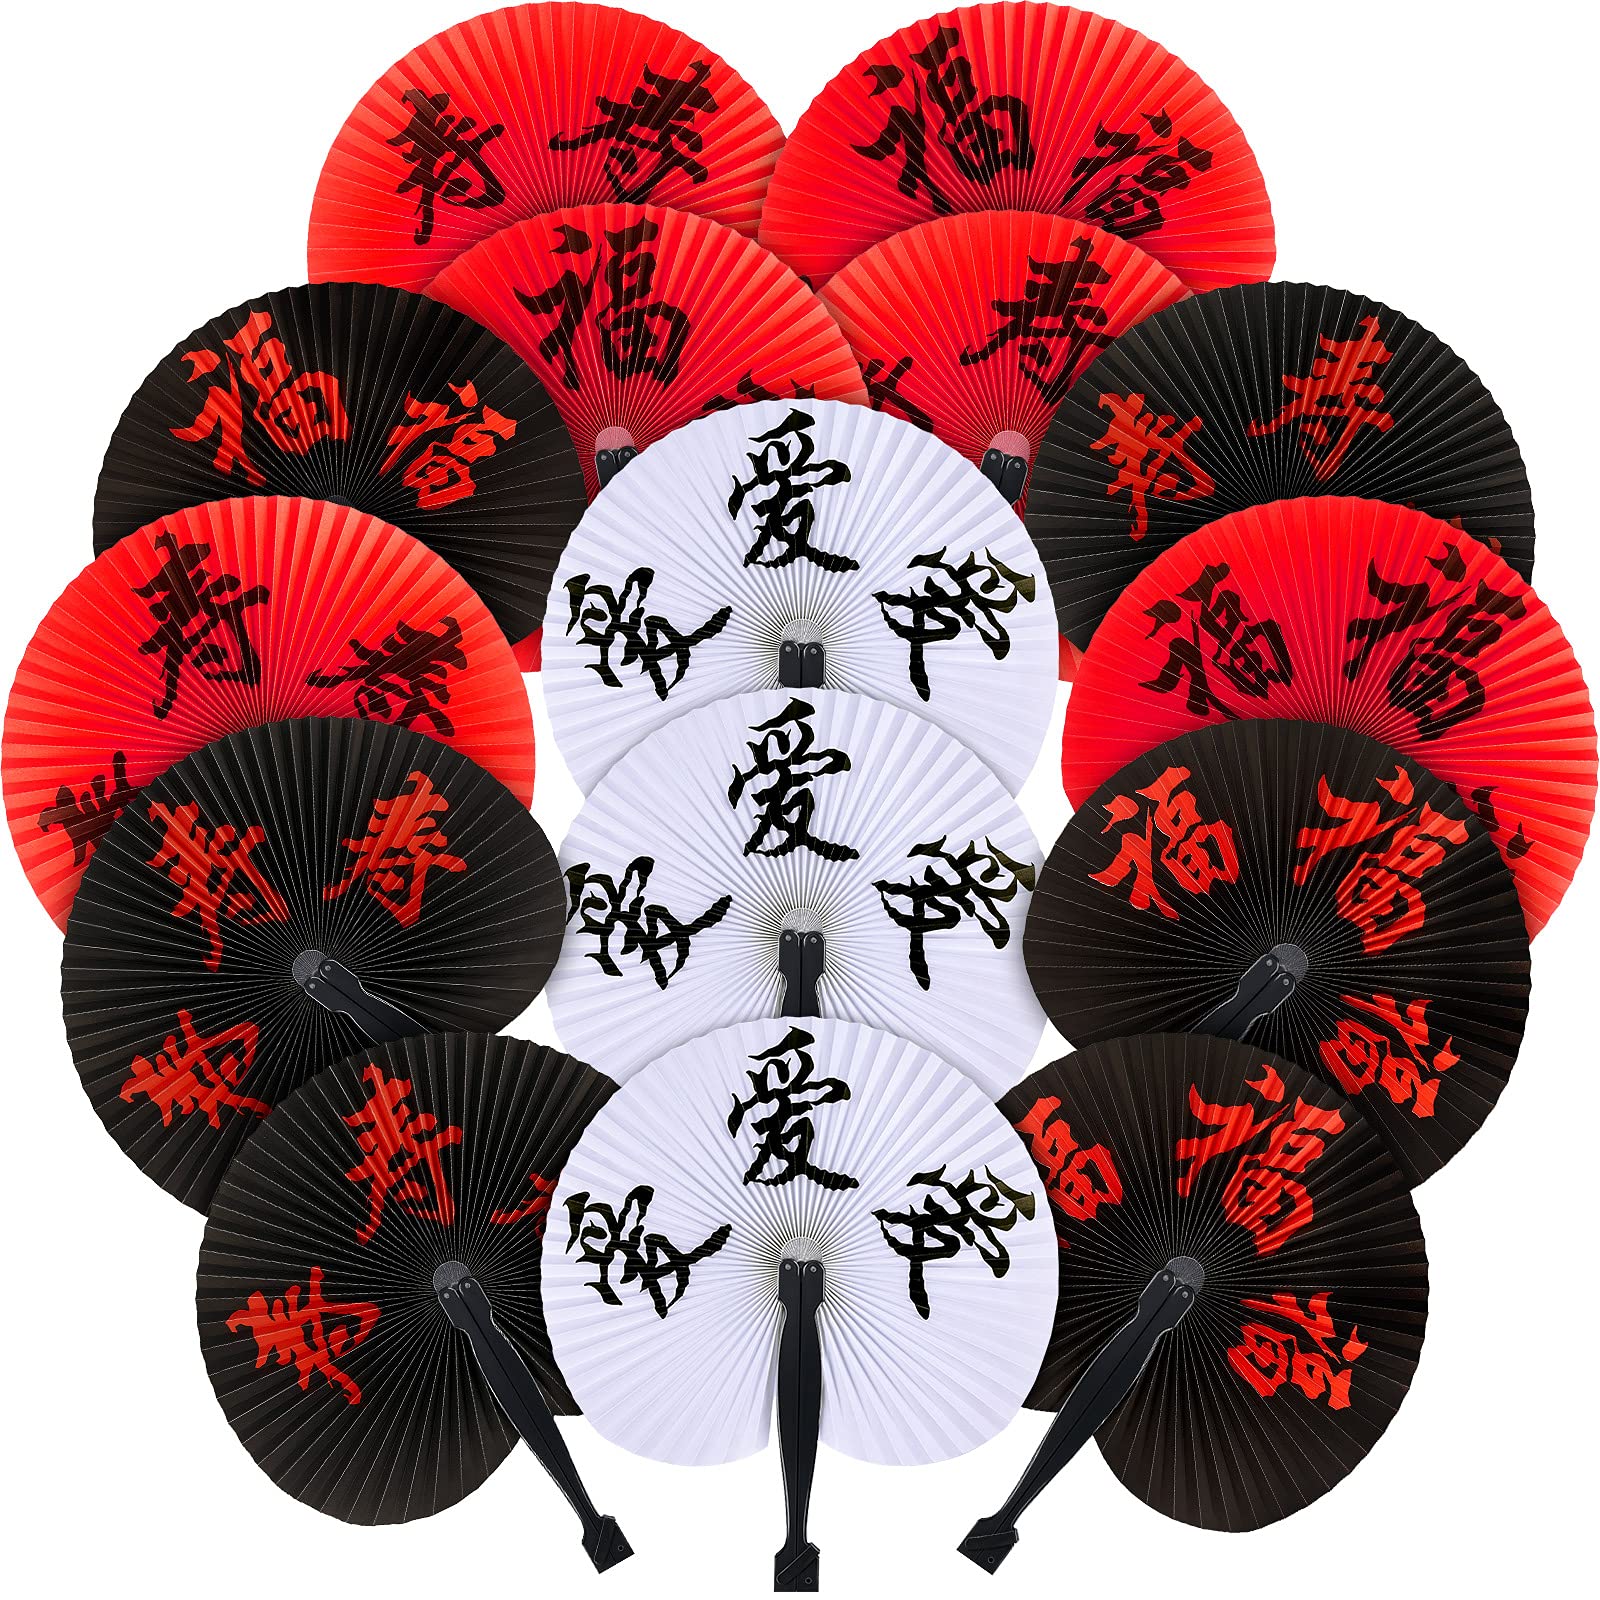 Jetec 15 Pieces Chinese New Year Fans Chinese Character Folding Fan Oriental Handheld Paper Fans Japanese Round Fan for Wedding Birthd